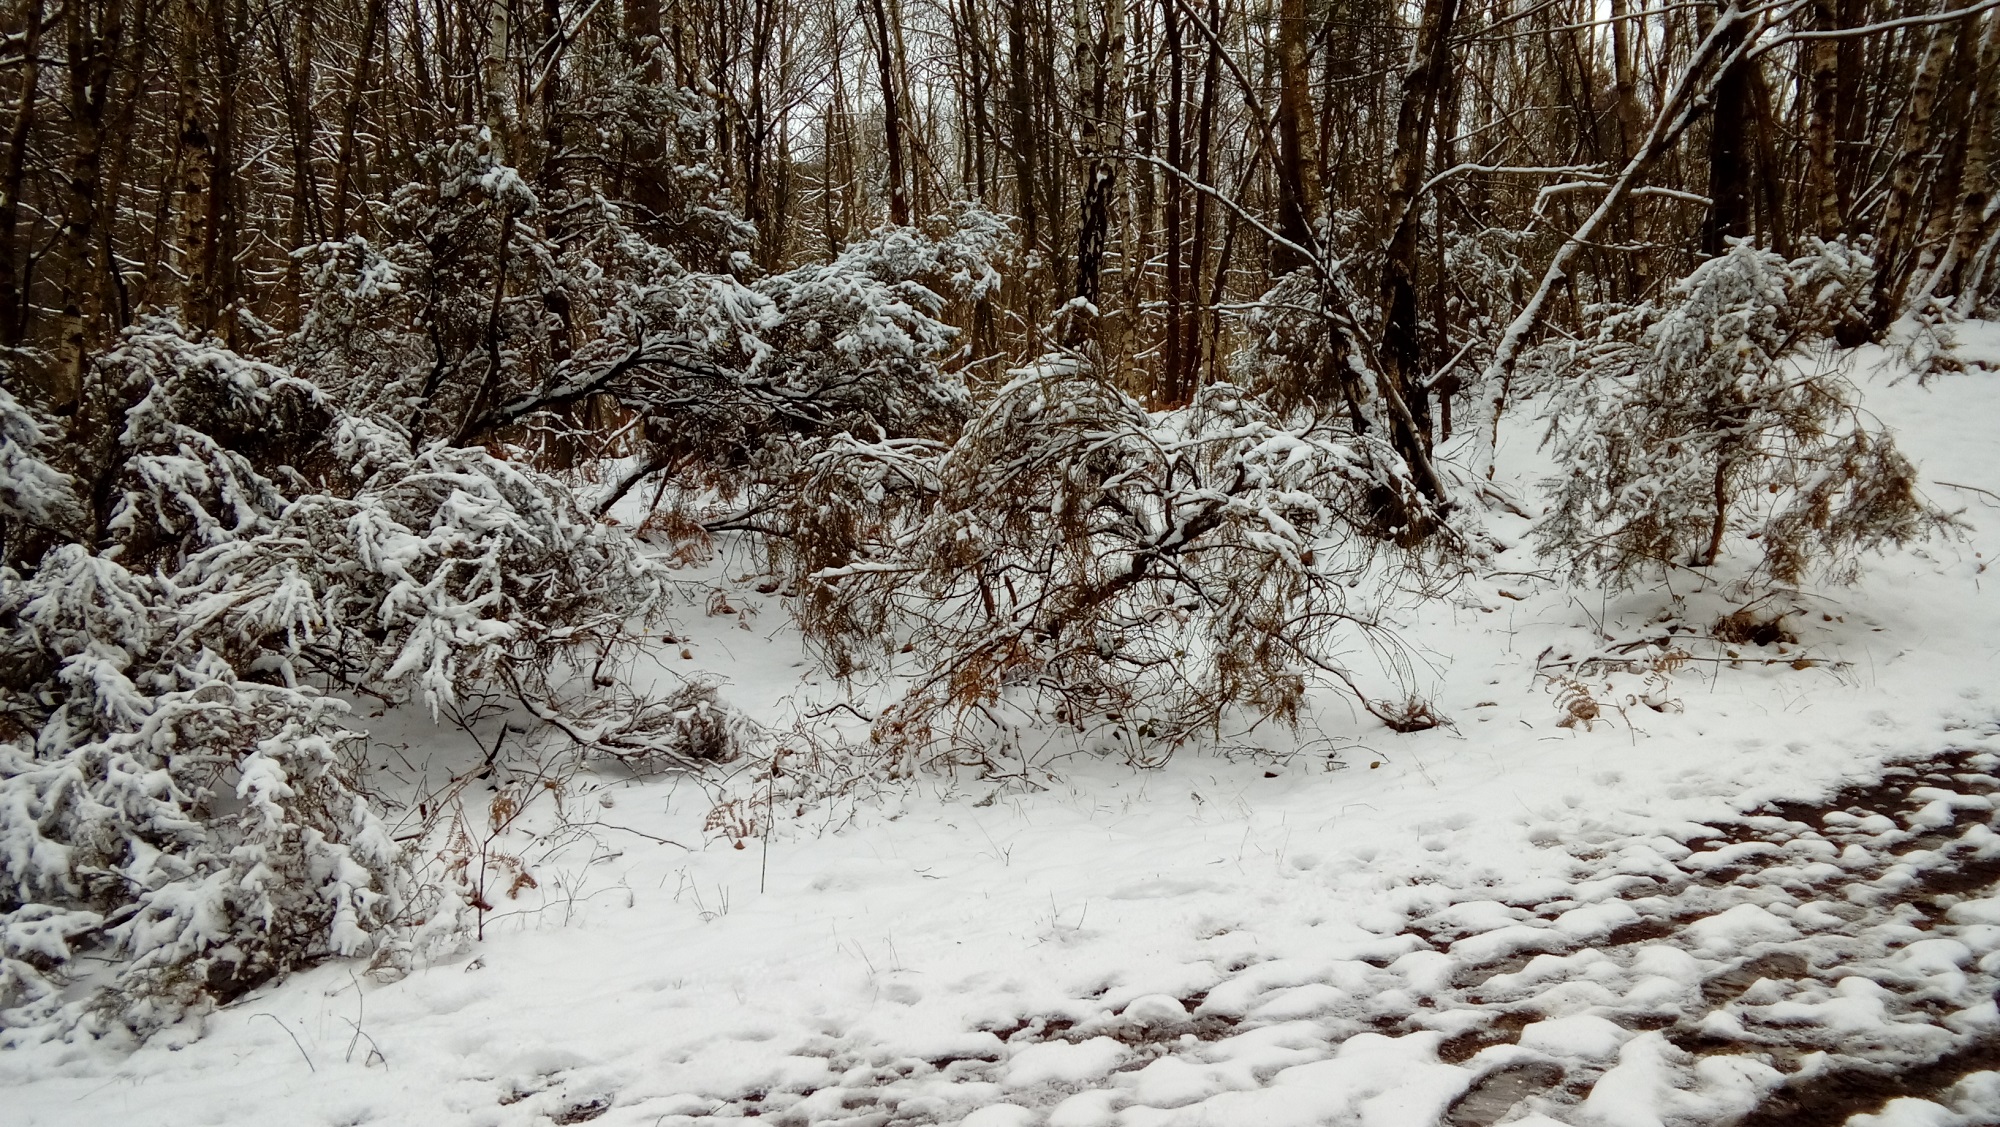 Snow laden shrubs and bushes in a woodland area surrounded by snow covered ground on a cold winter day.